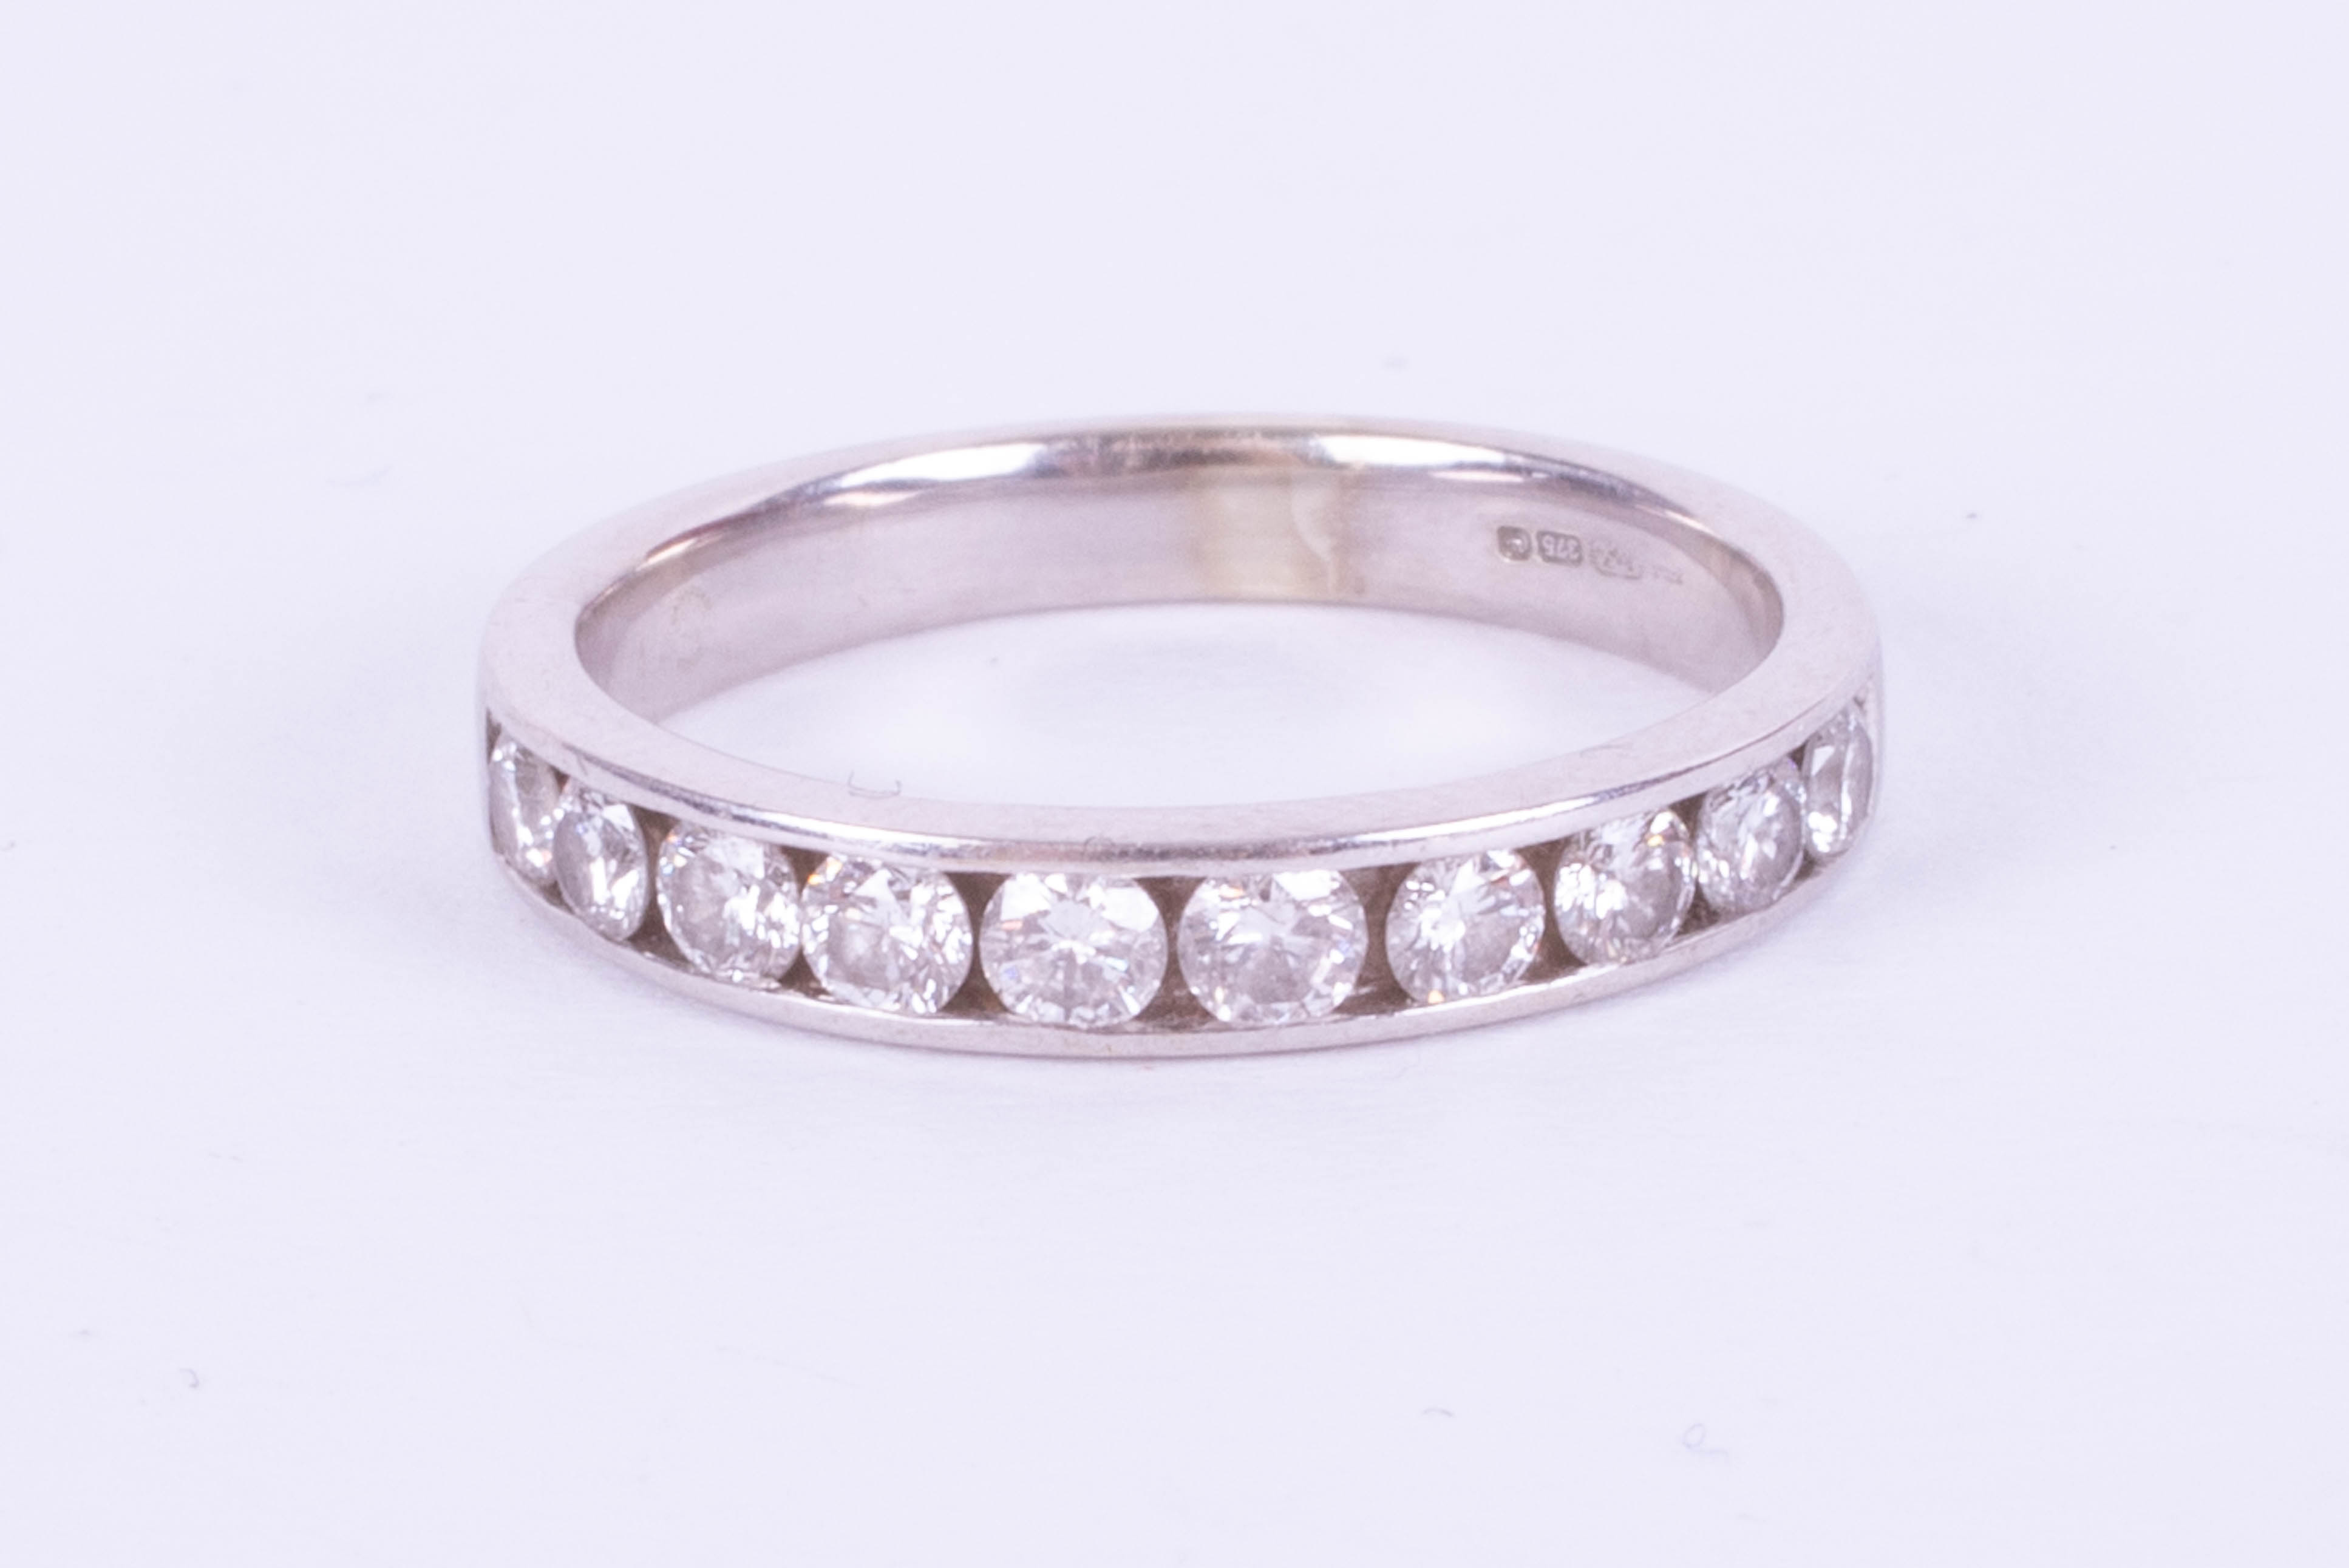 Canadian Ice Diamond Collection, a 9ct white gold and diamond eternity ring, colour I, clarity I1,